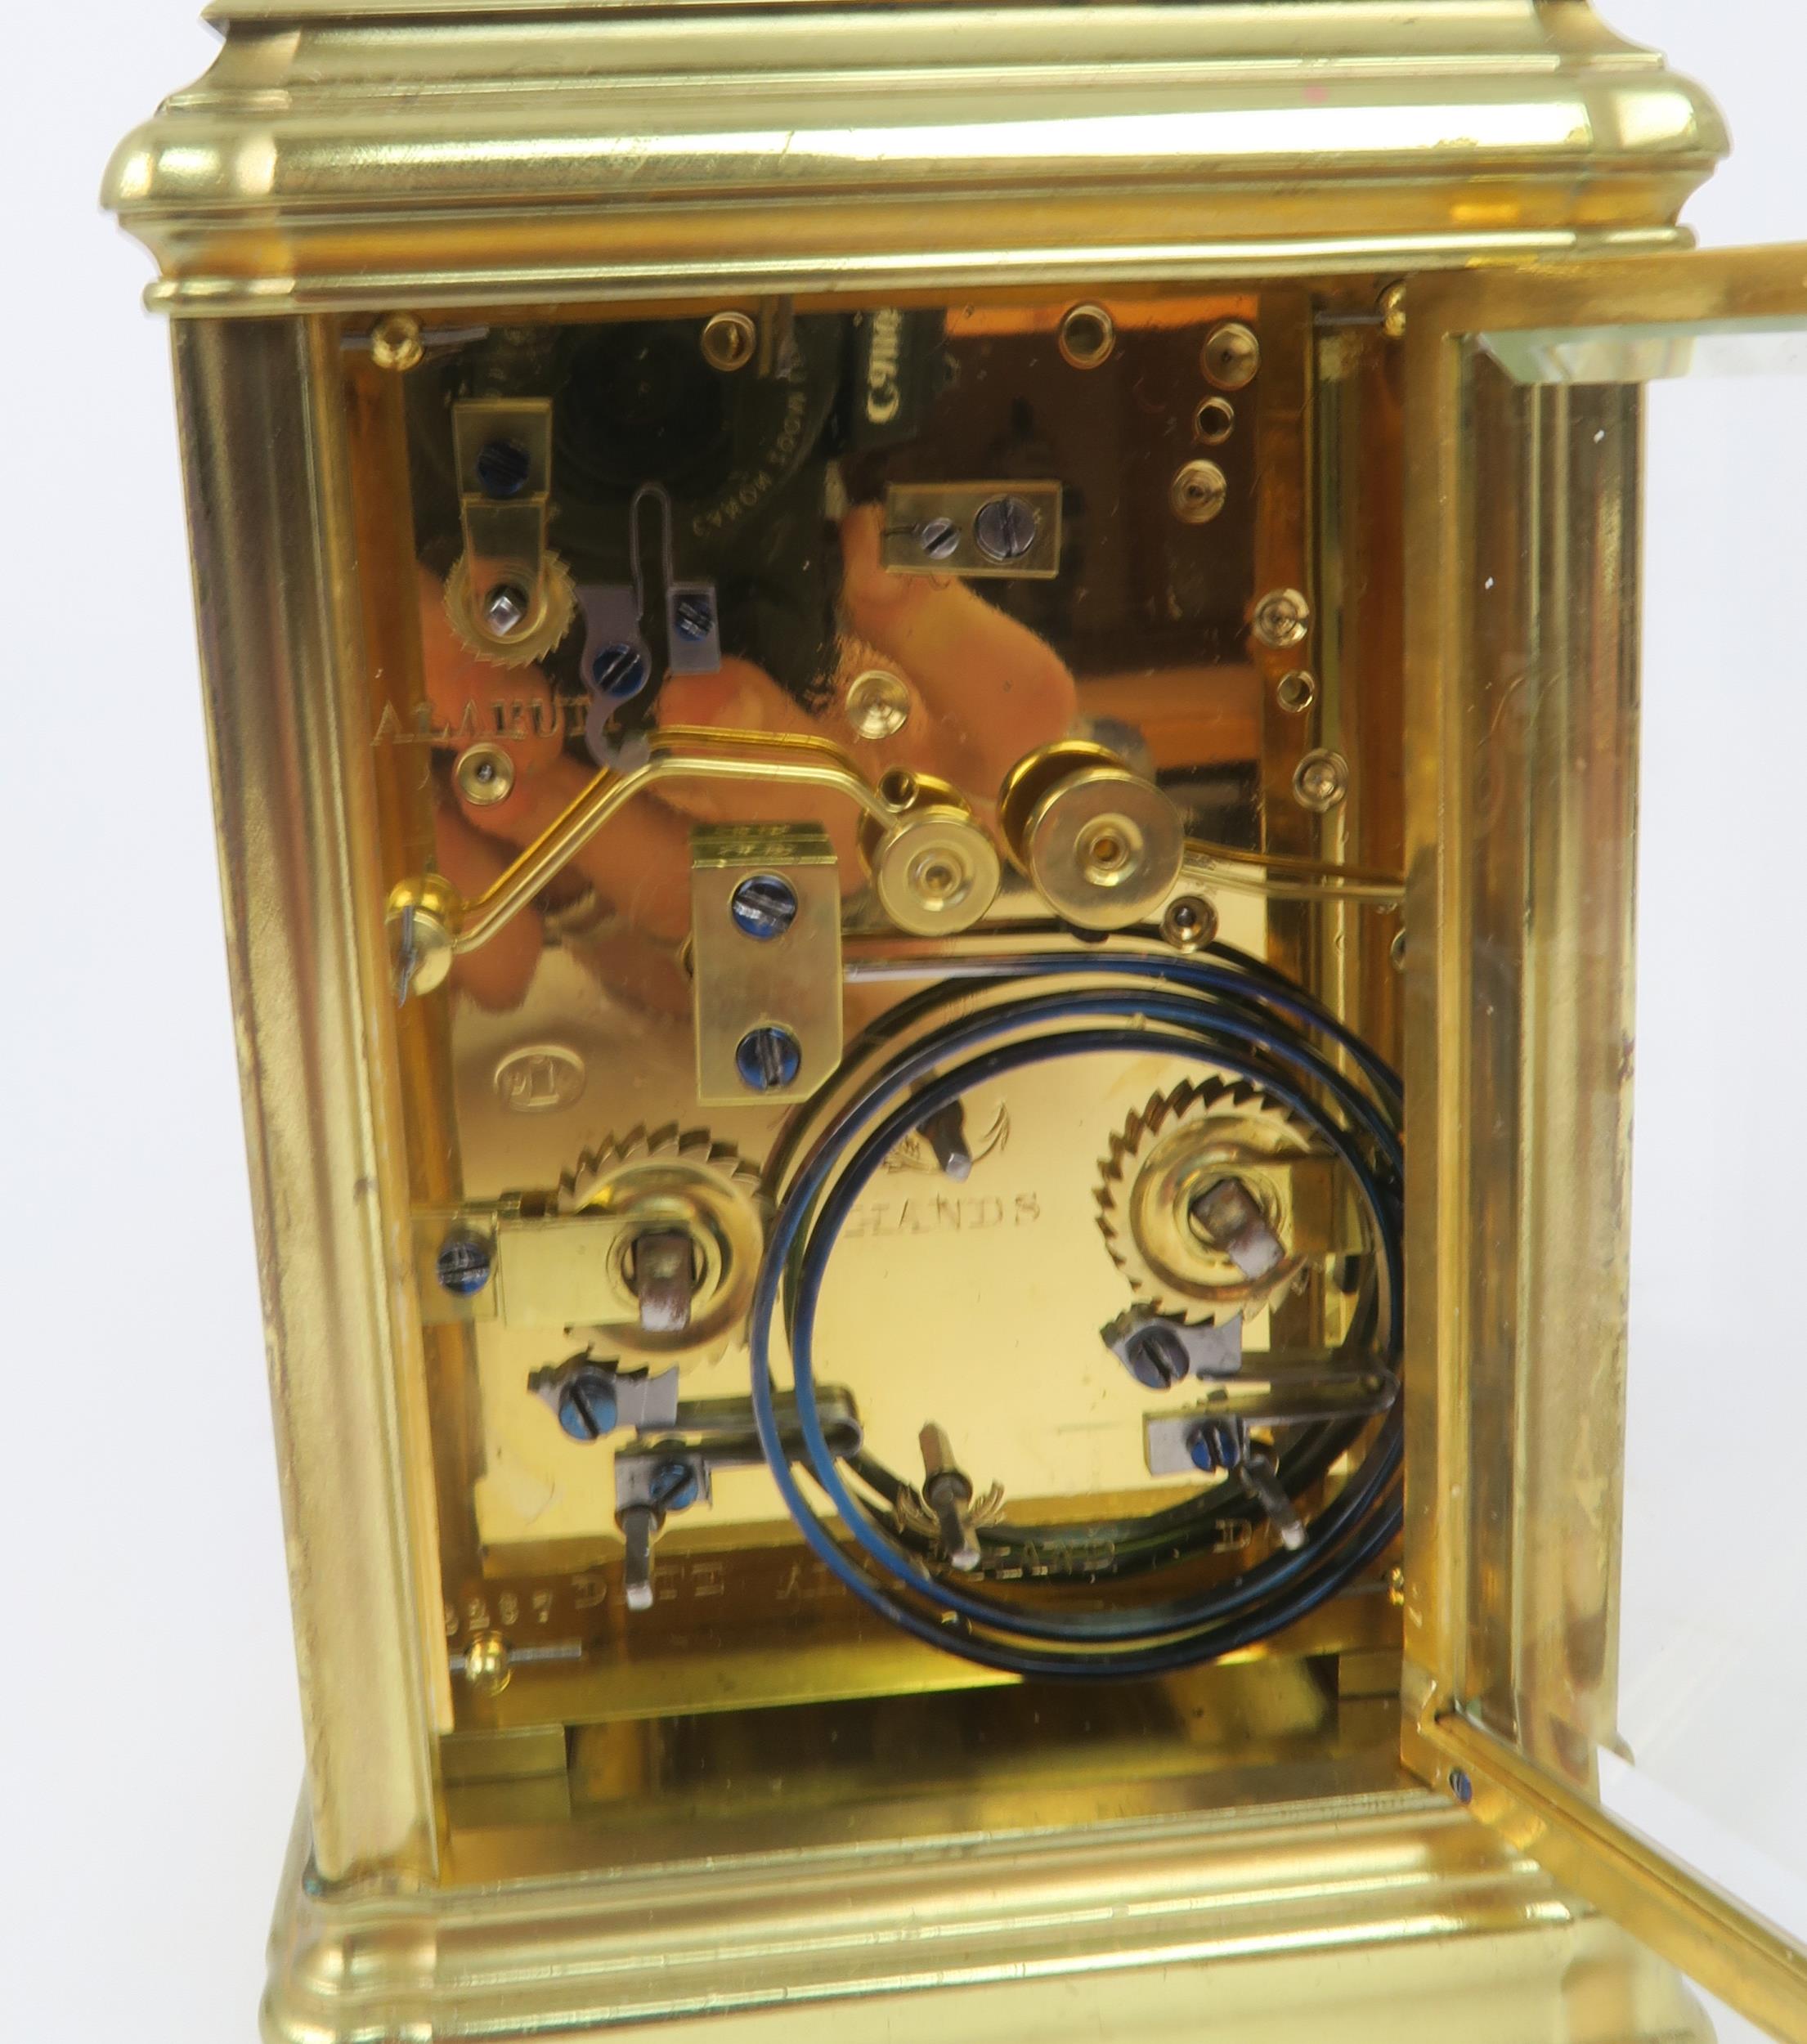 A FRENCH BRASS AND GLASS REPEATING CARRIAGE CLOCK by Drocourt for J. W. Benson, London with striking - Image 3 of 5